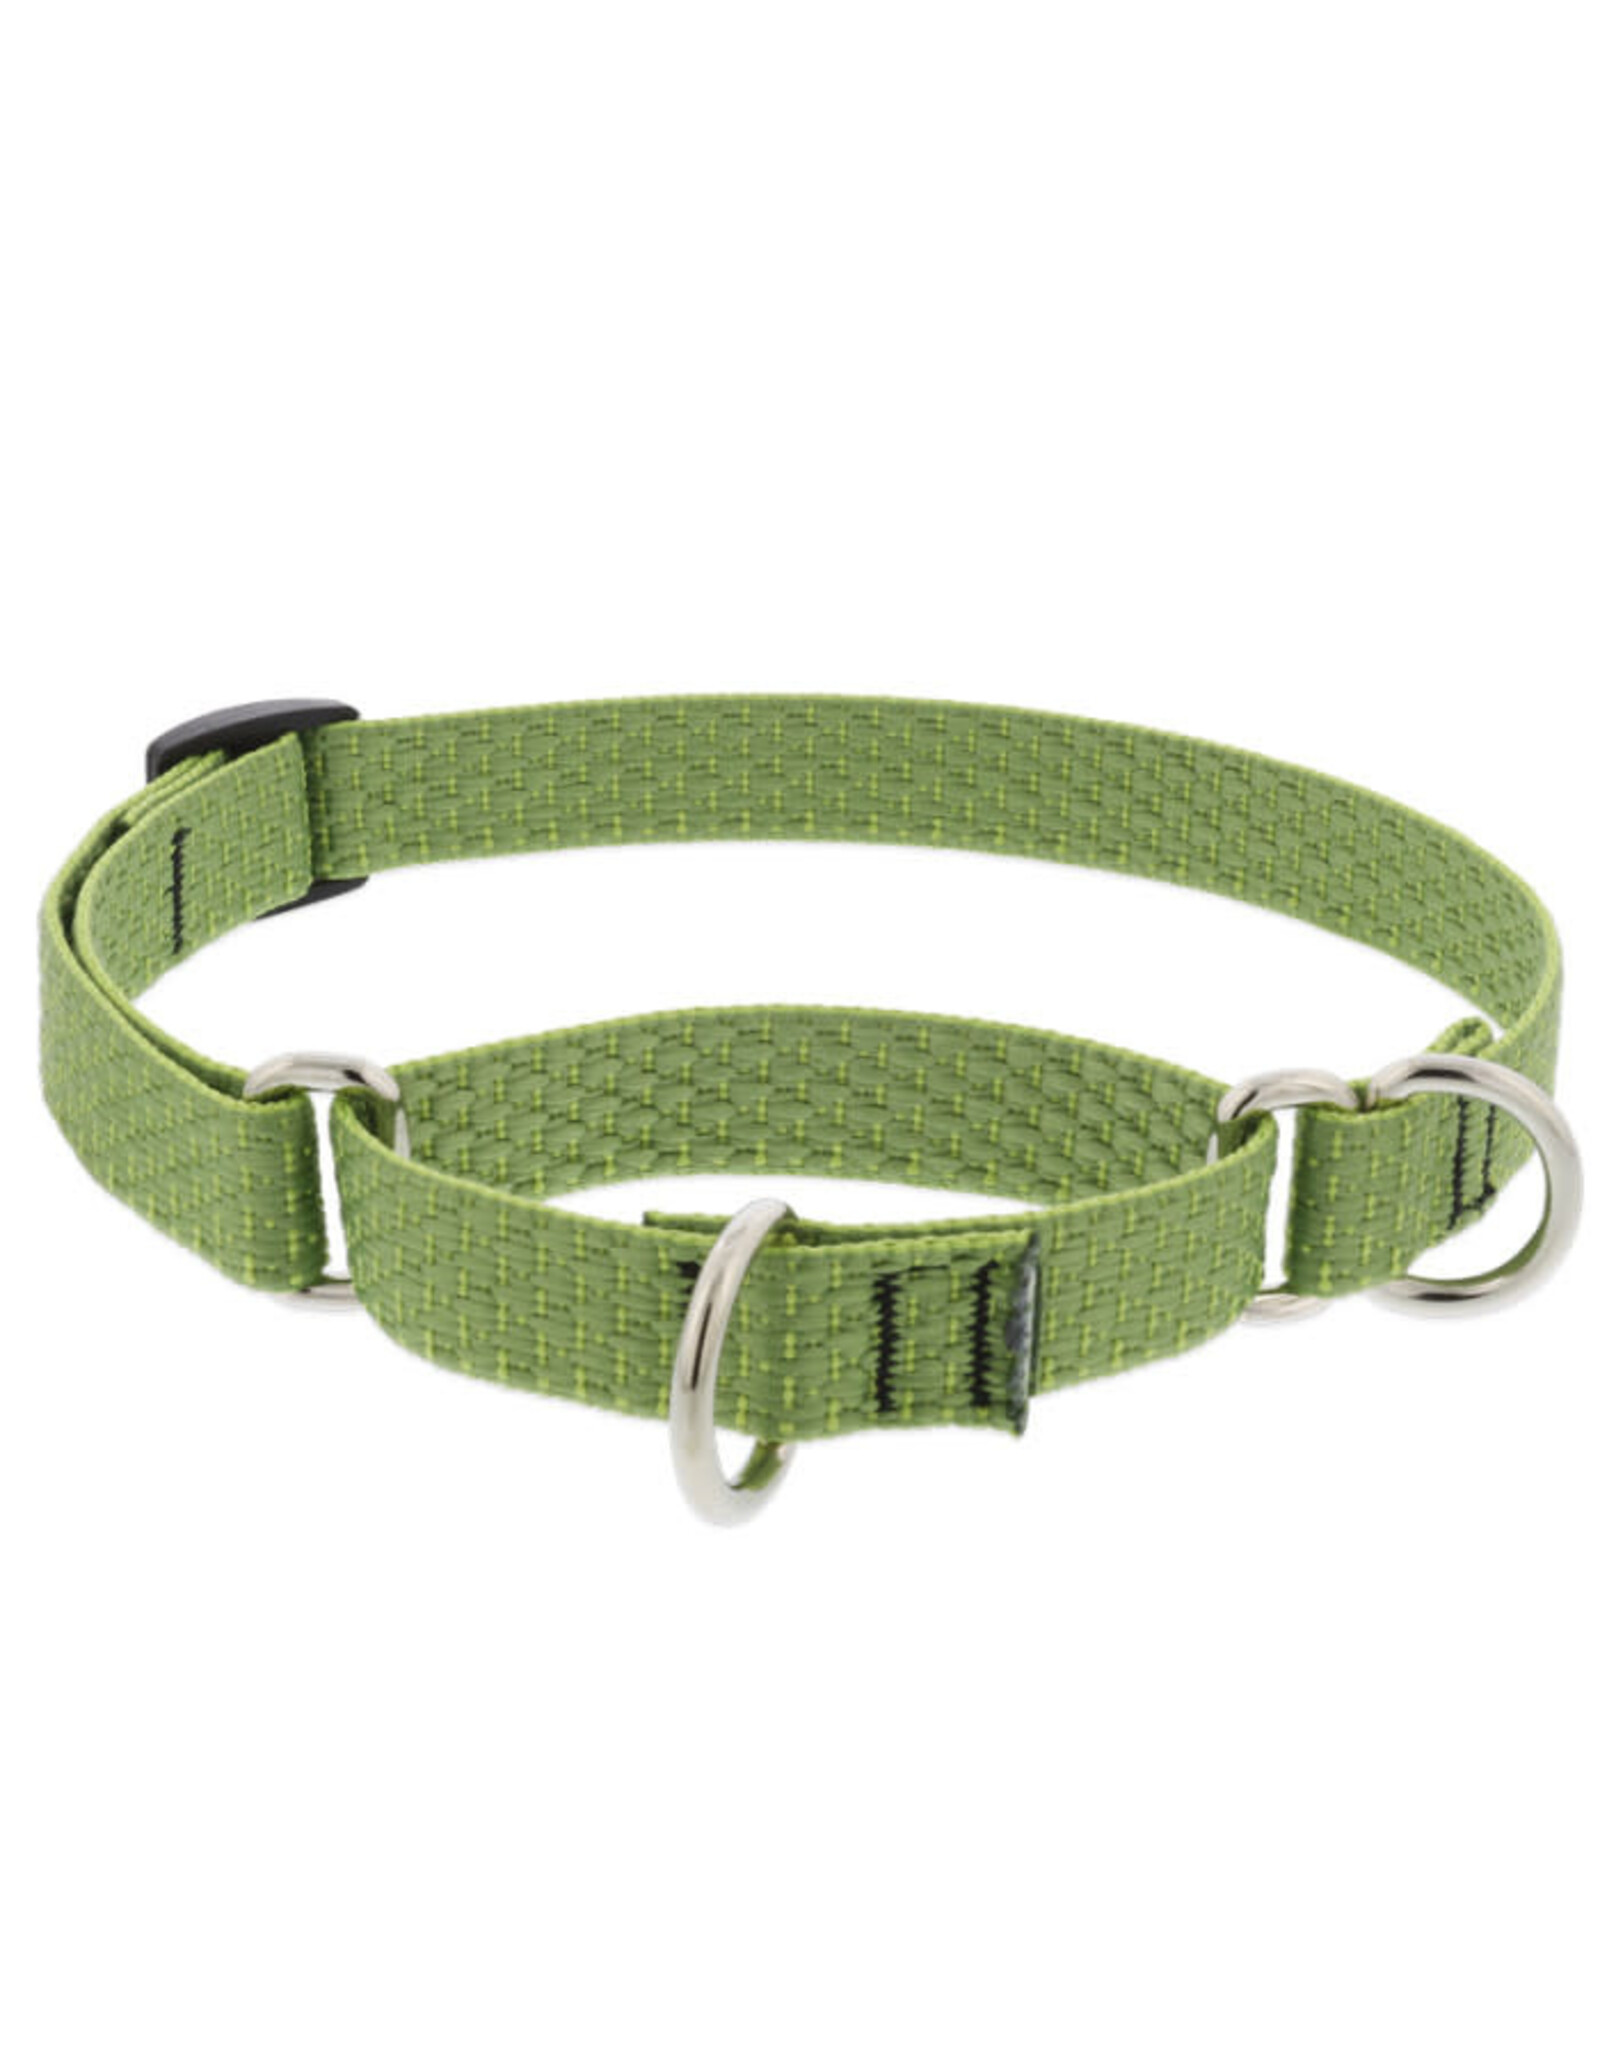 LUPINE LUPINE 1IN MOSS 15-22 MARTINGALE COLLAR